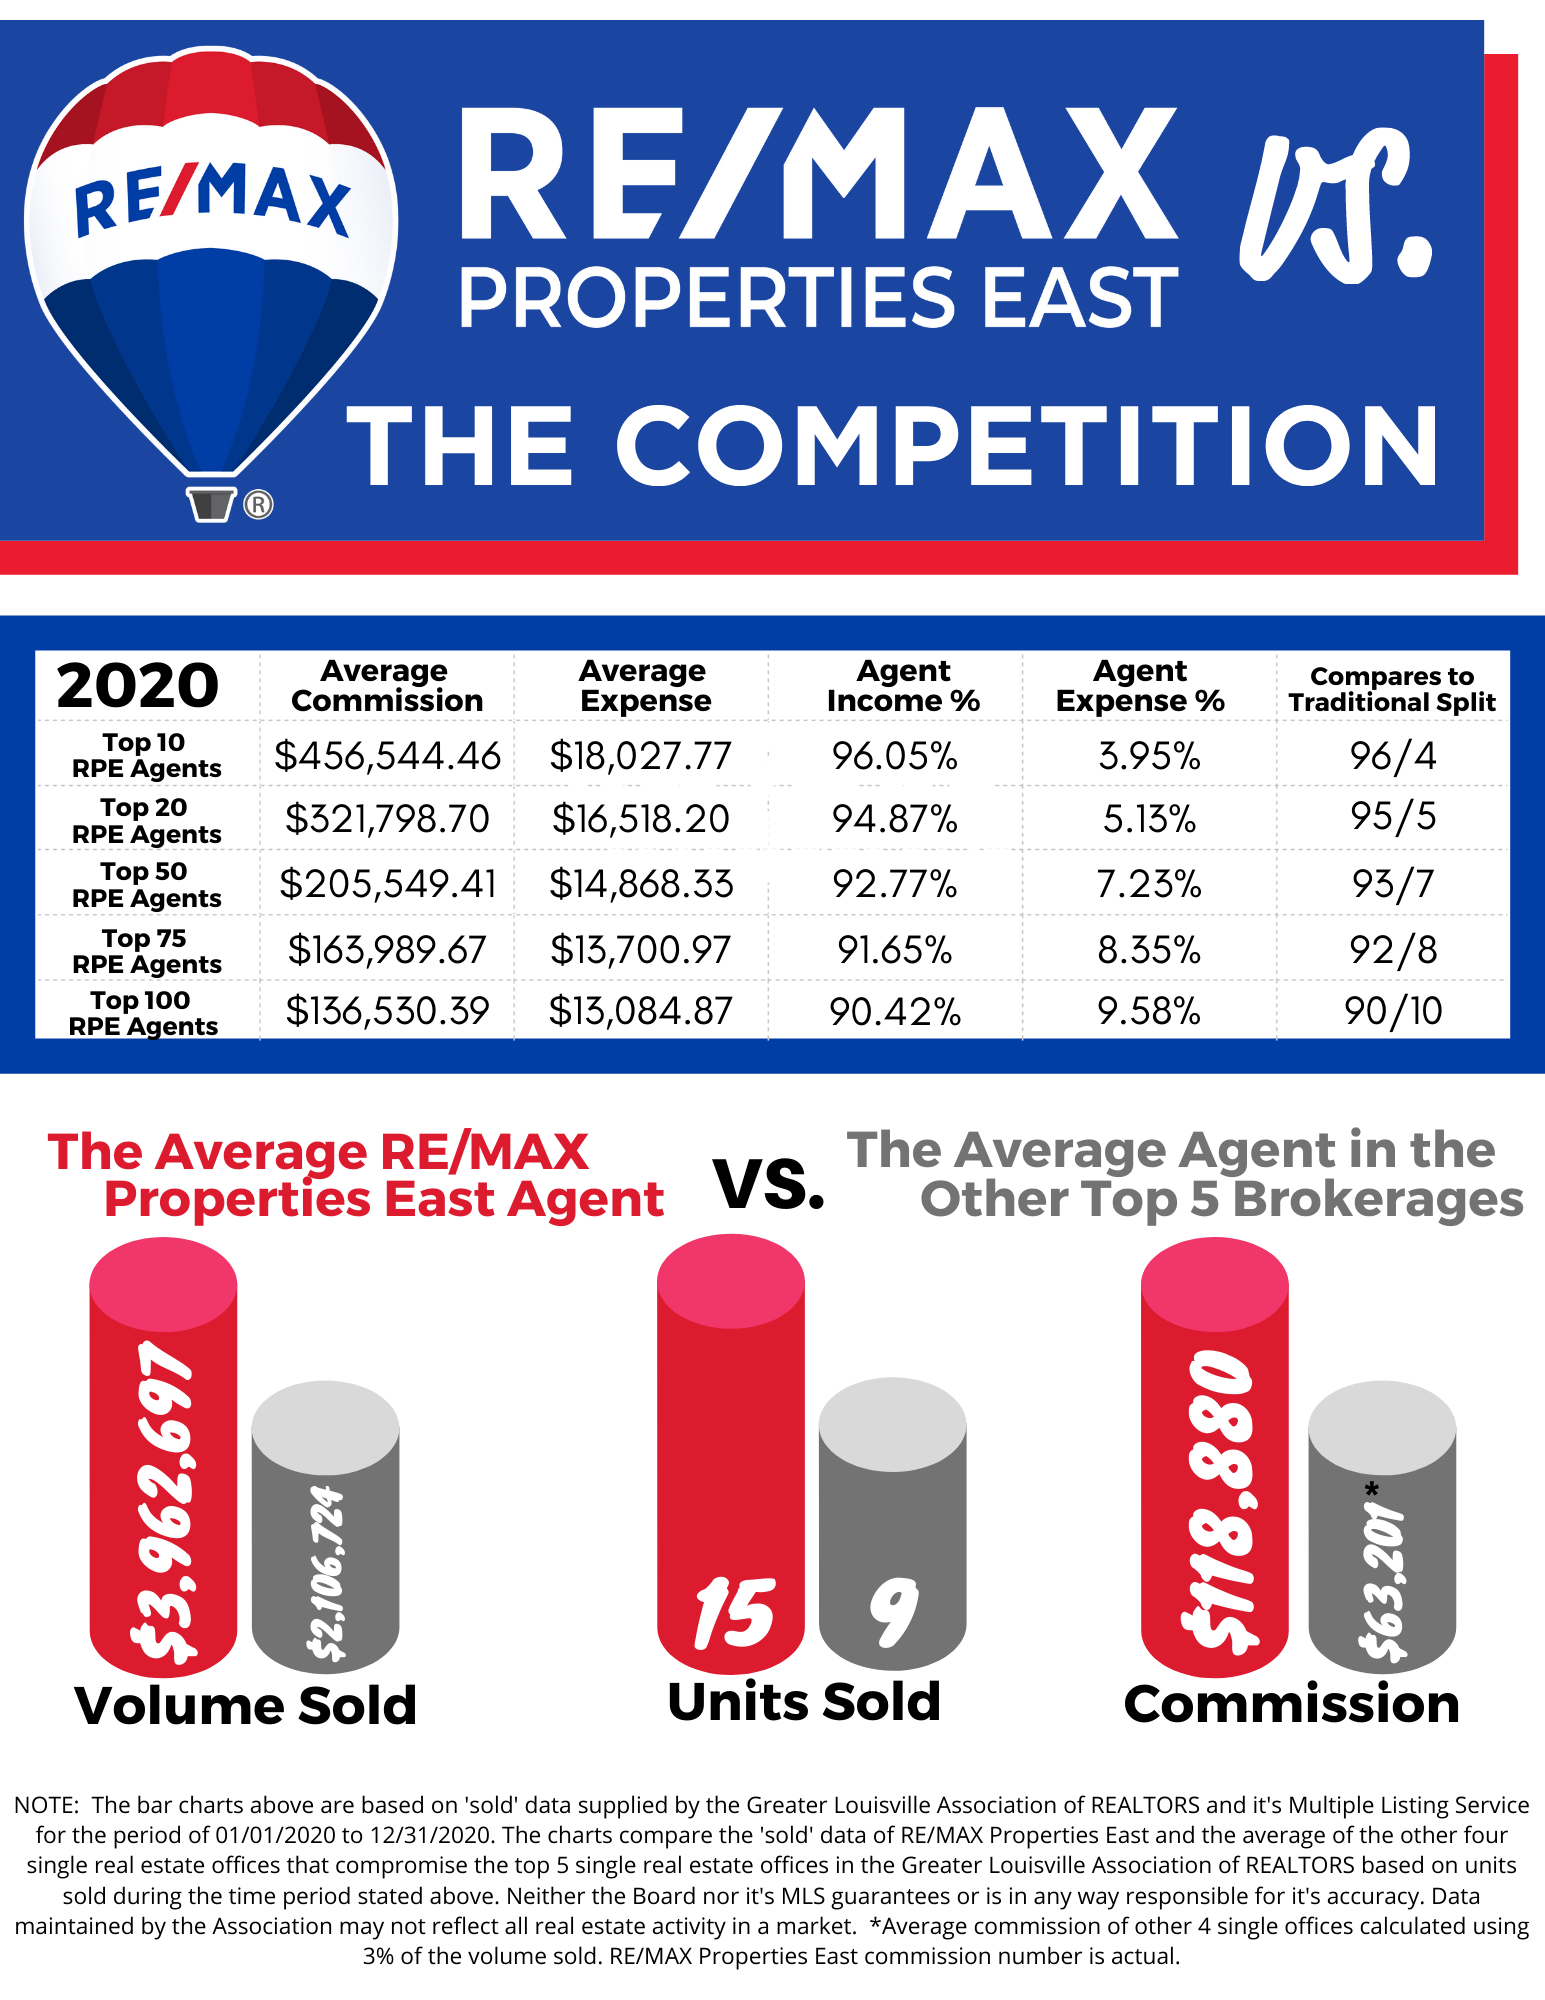 Why Re/Max Properties East